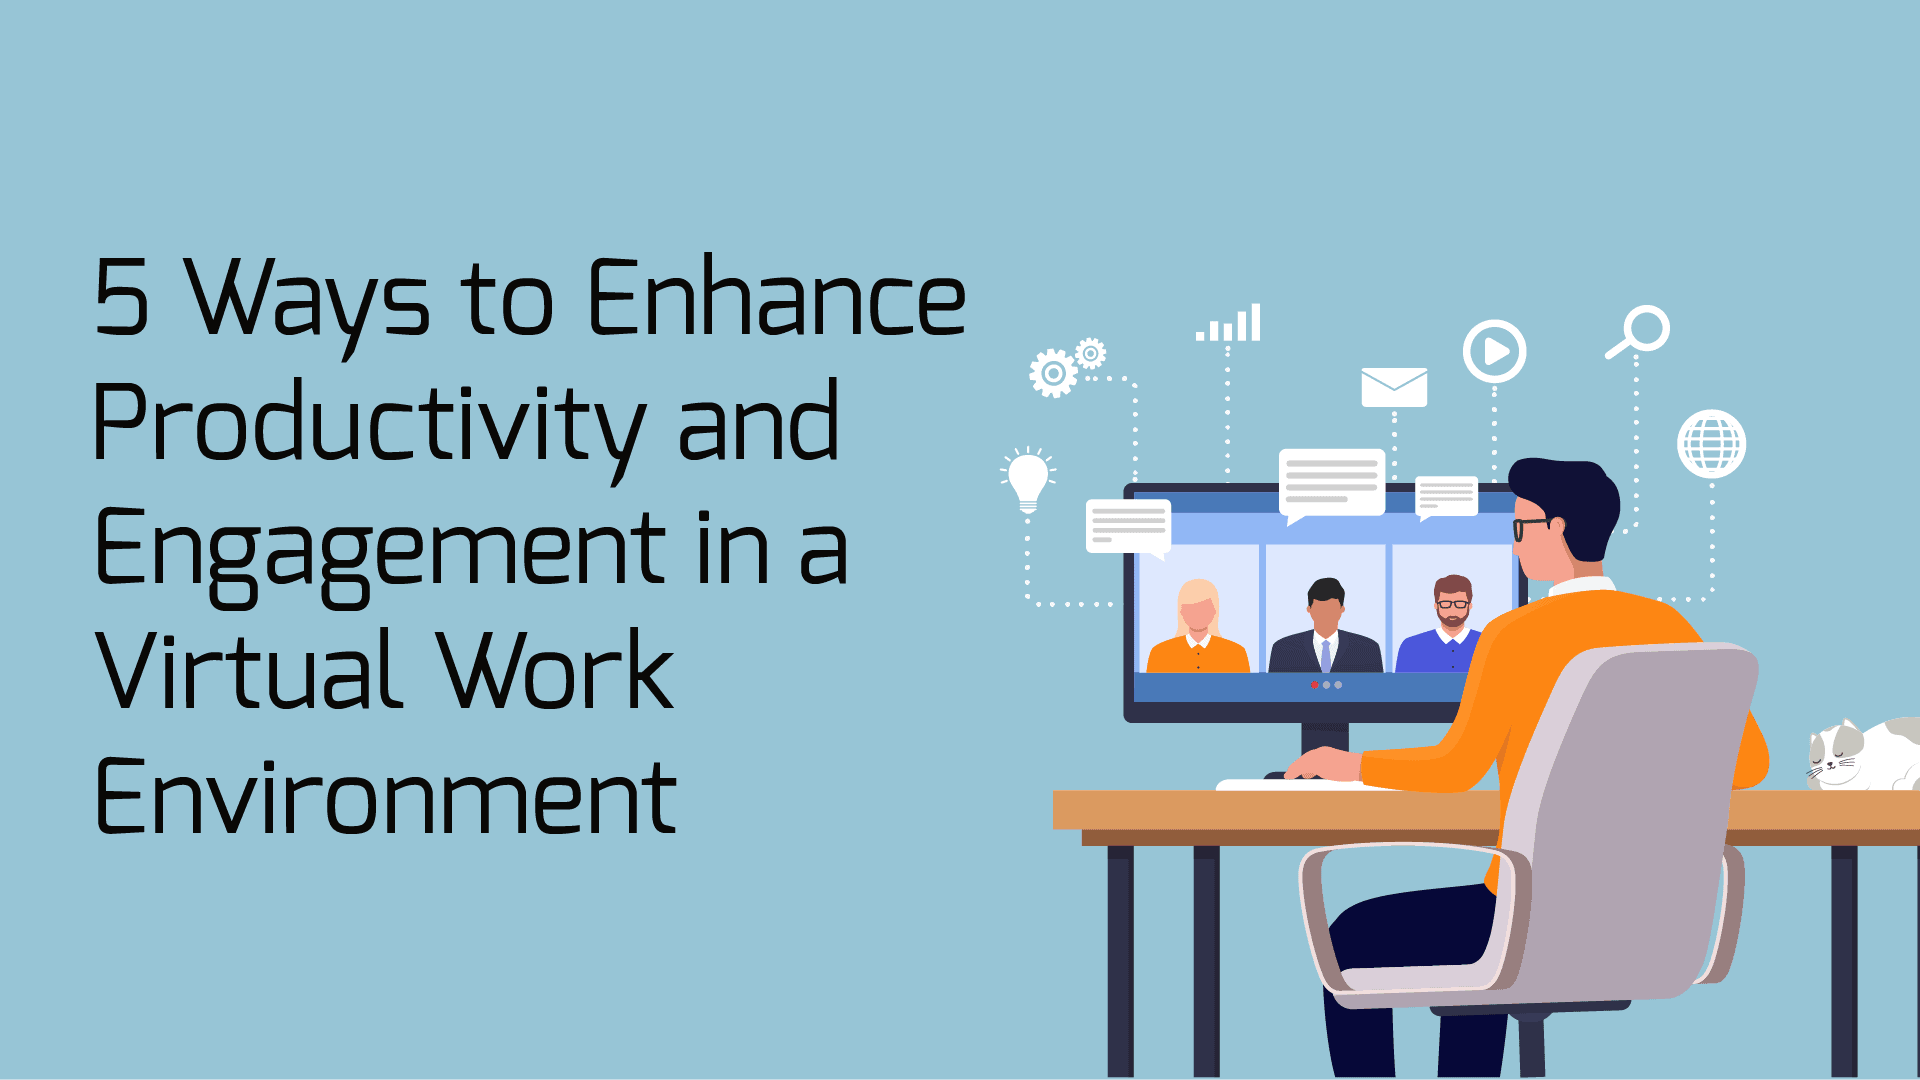 5 Ways to Enhance Productivity and Engagement in a Virtual Work Environment